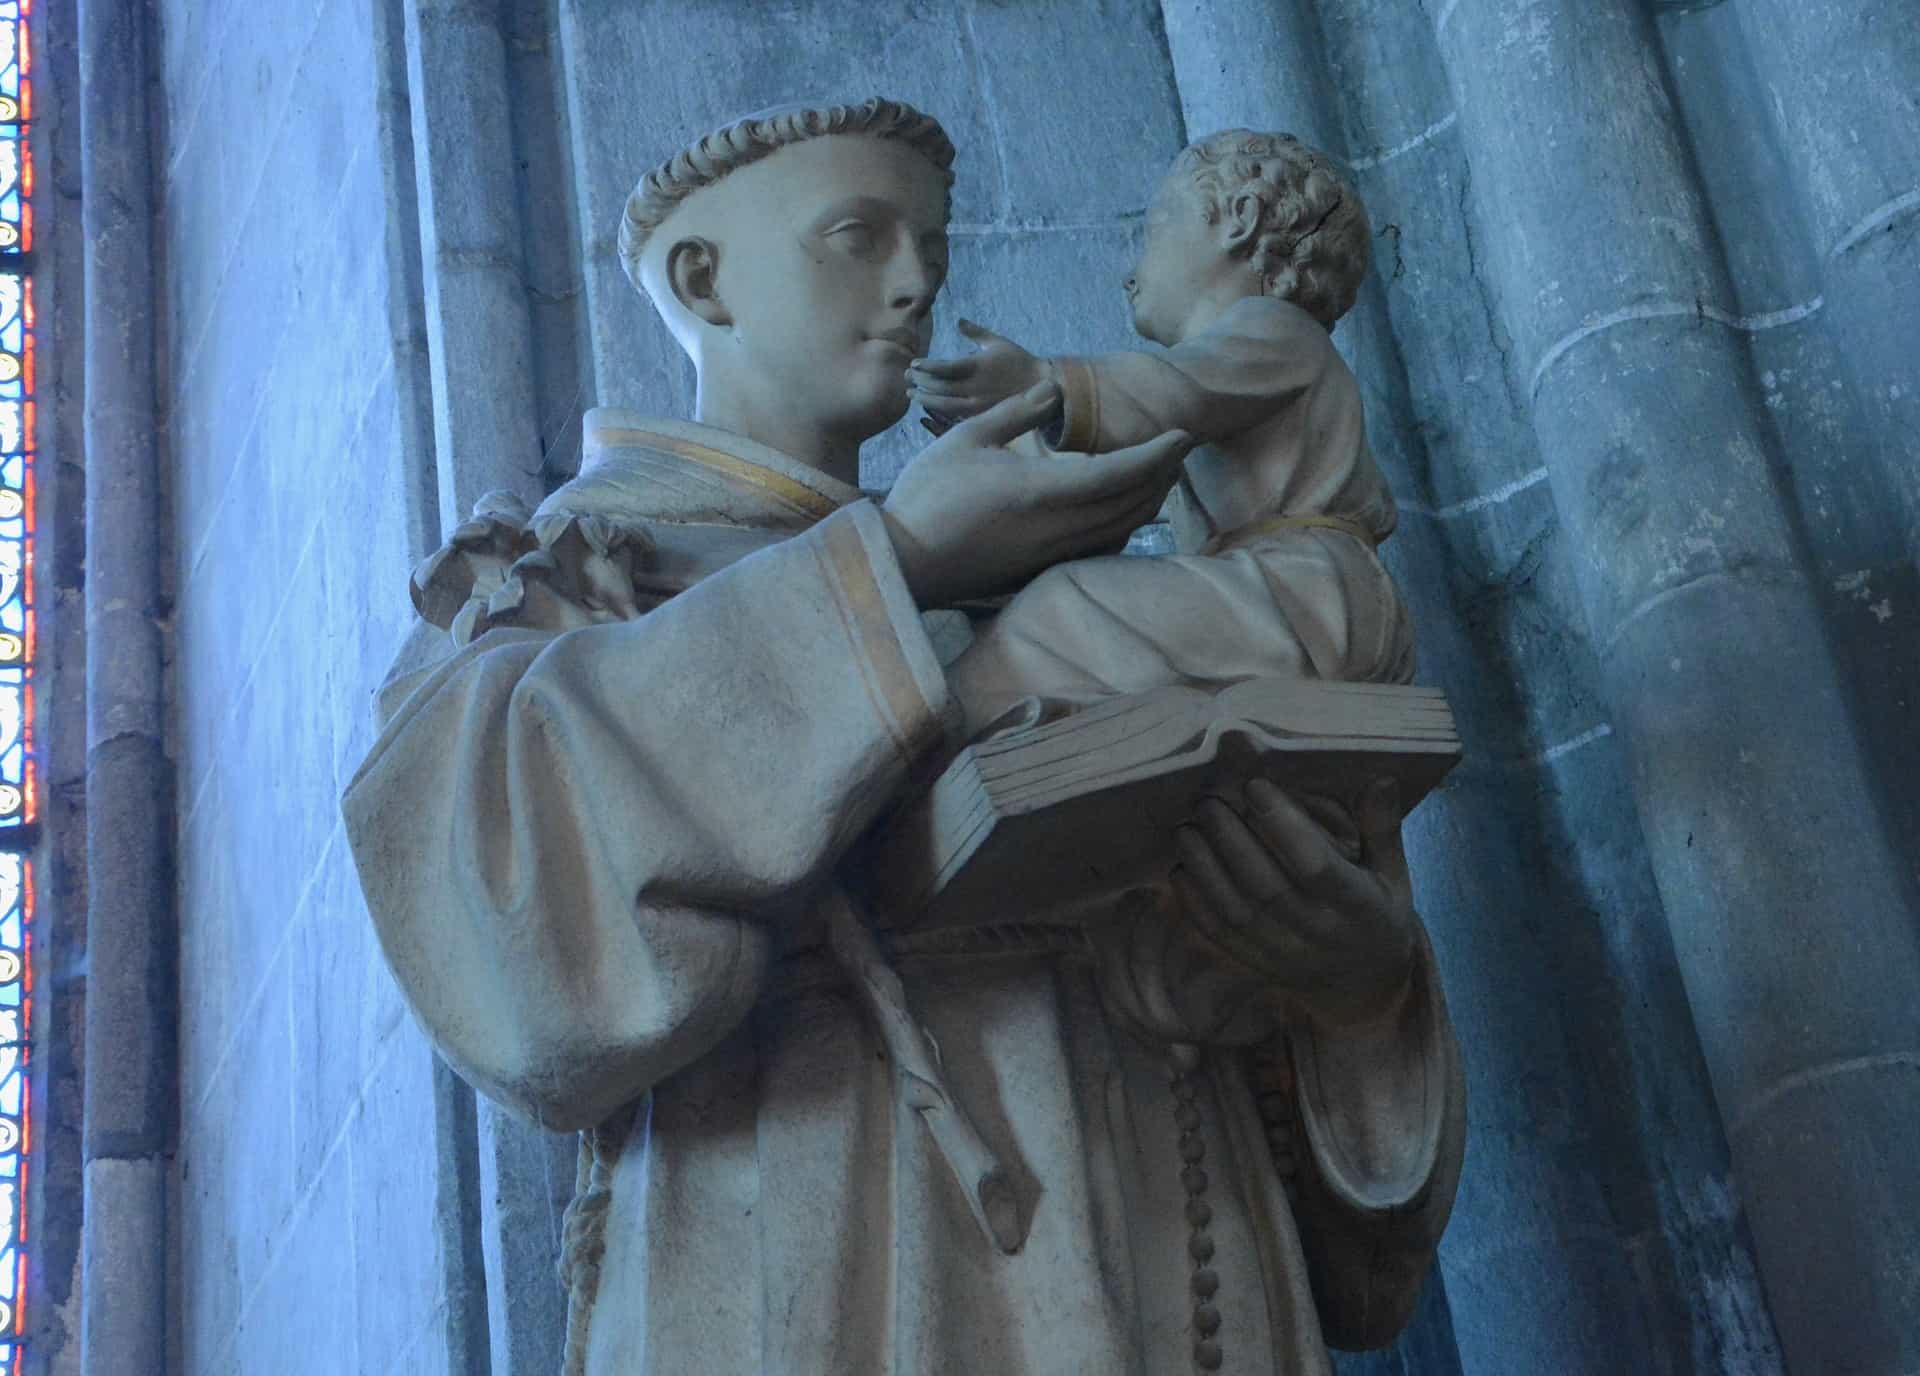 Prayer to St. Anthony of Padua, Patron Saint of Lost Things, The Poor, Fishermen, Travelers, and Pregnant Women.